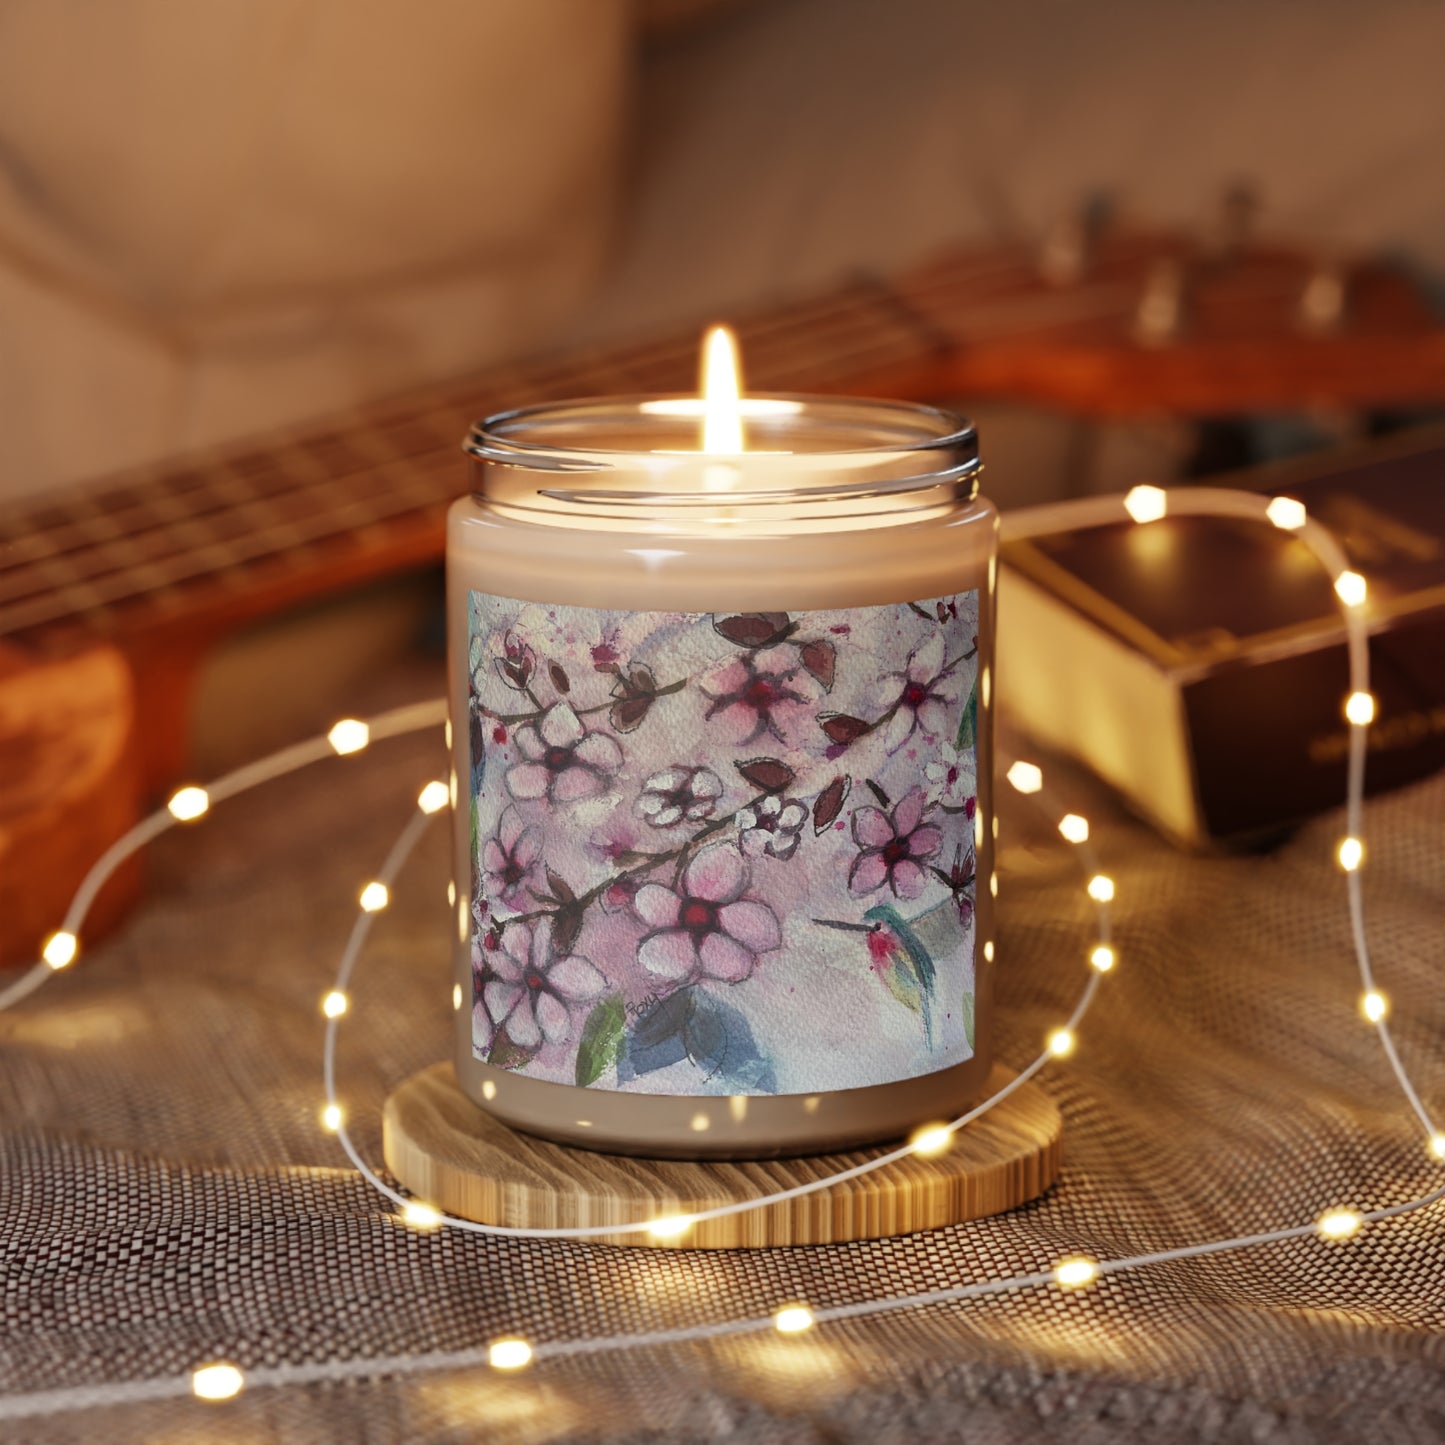 Hummingbird in Cherry Blossoms Candle